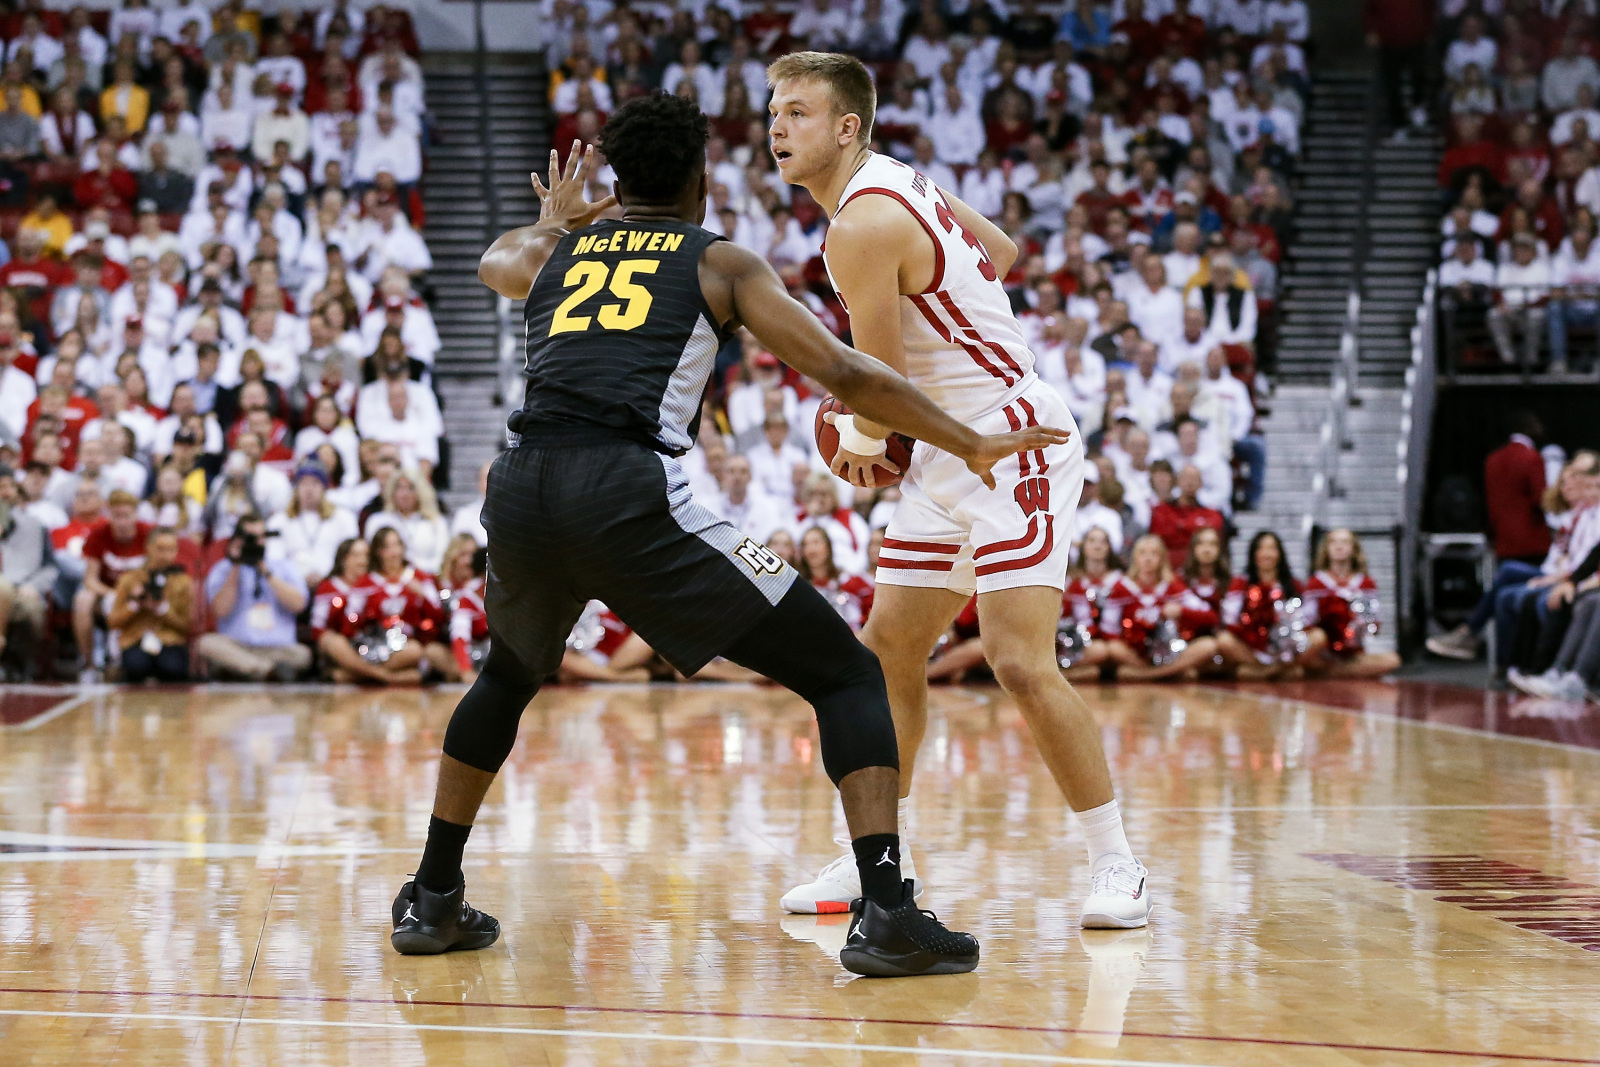 Wisconsin Game Today Wisconsin vs Marquette, Predictions, Odds, TV Channel and Live Stream for Basketball Game Dec